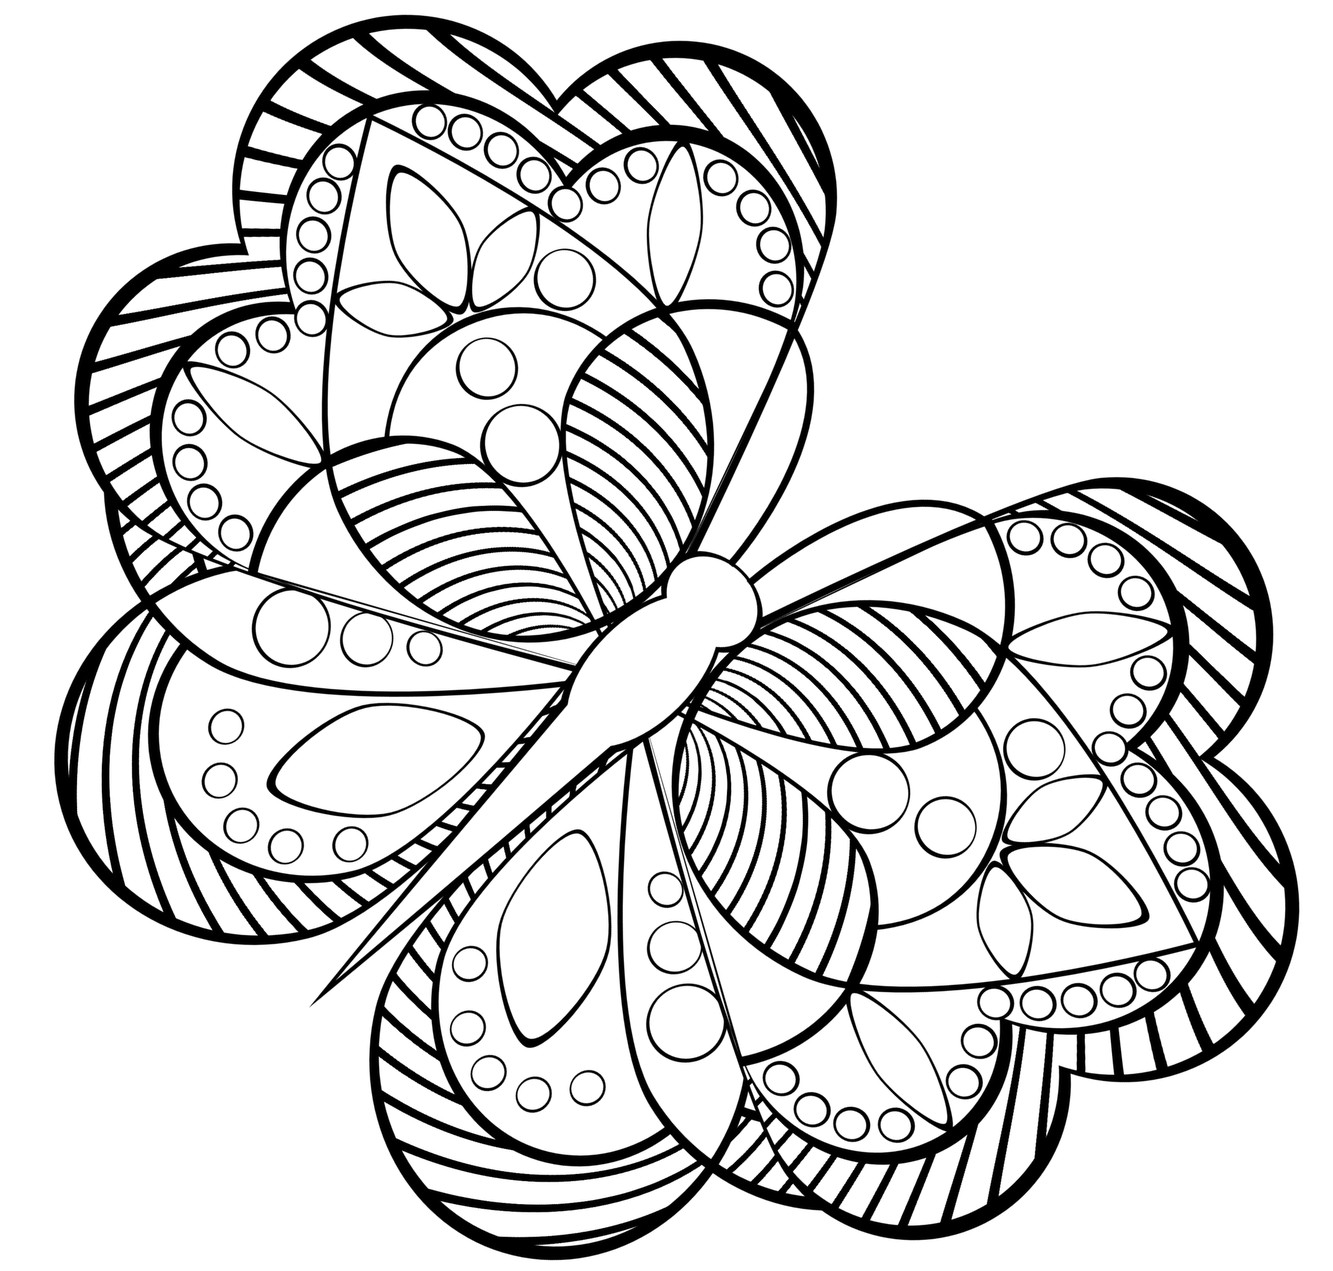 Coloring Pages For Kids Printable
 Best Free Printable Coloring Pages for Kids and Teens